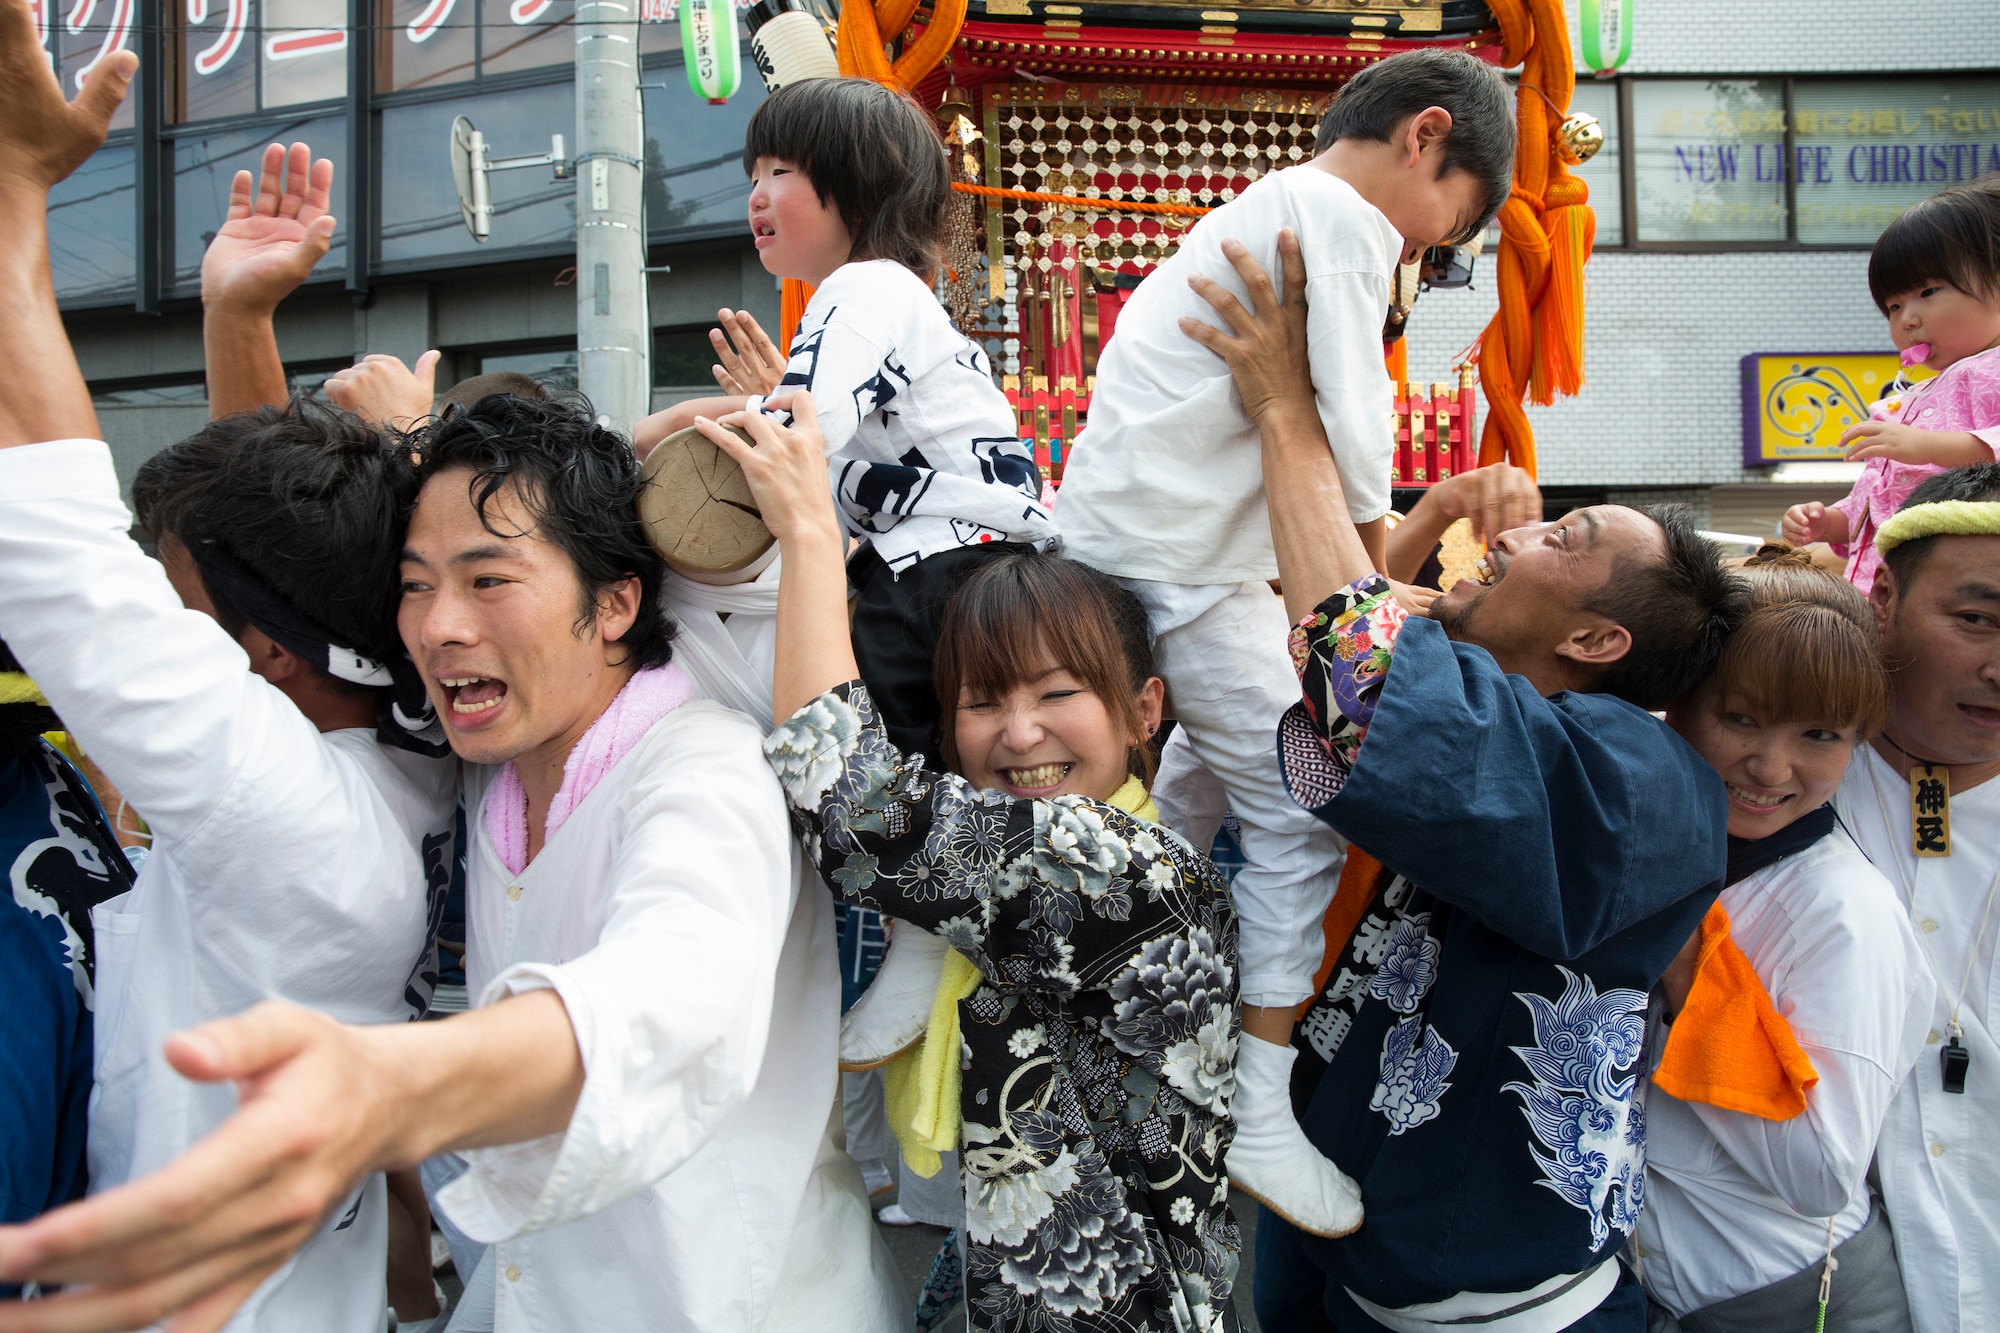 Mikoshi shrine carriers hoist their shrine with their kids at Fussa city, Japan,  Aug. 8, 2014. Multiple shrines were carried from the Fussa shinmei-sha, shinto shrine, to City Hall during the 64th annual Fussa Tanabata Festival. (U.S. Air Force photo by Osakabe Yasuo/Released)